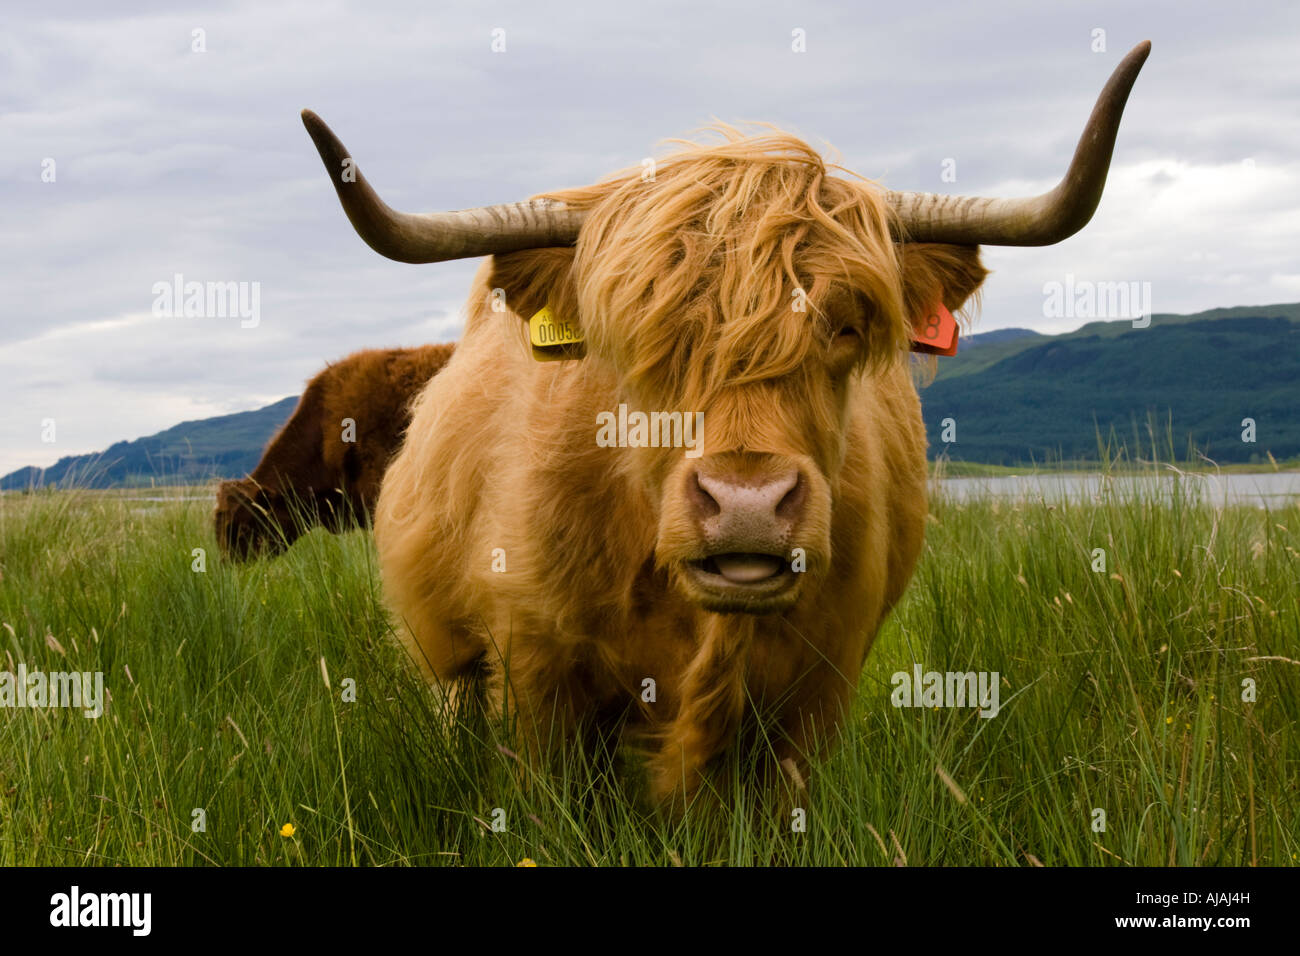 Highland cows from Scotland Stock Photo